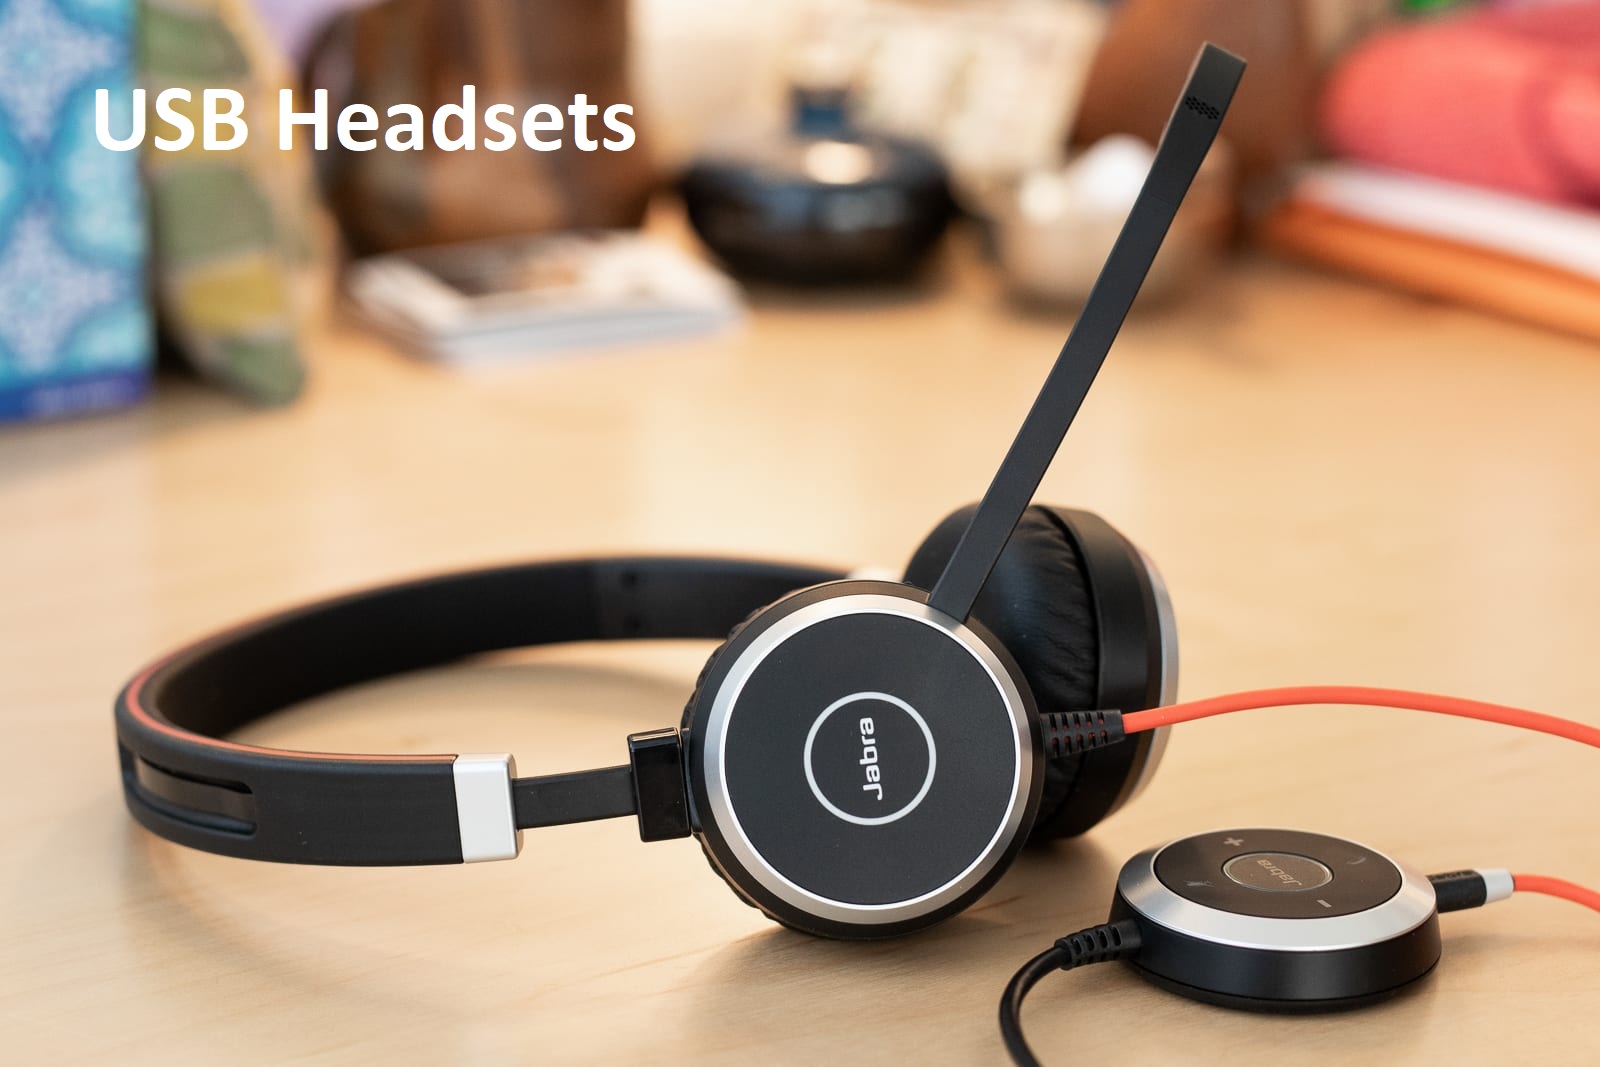 Follow These 6 Guidelines To Get USB Headsets In An Easy Manner